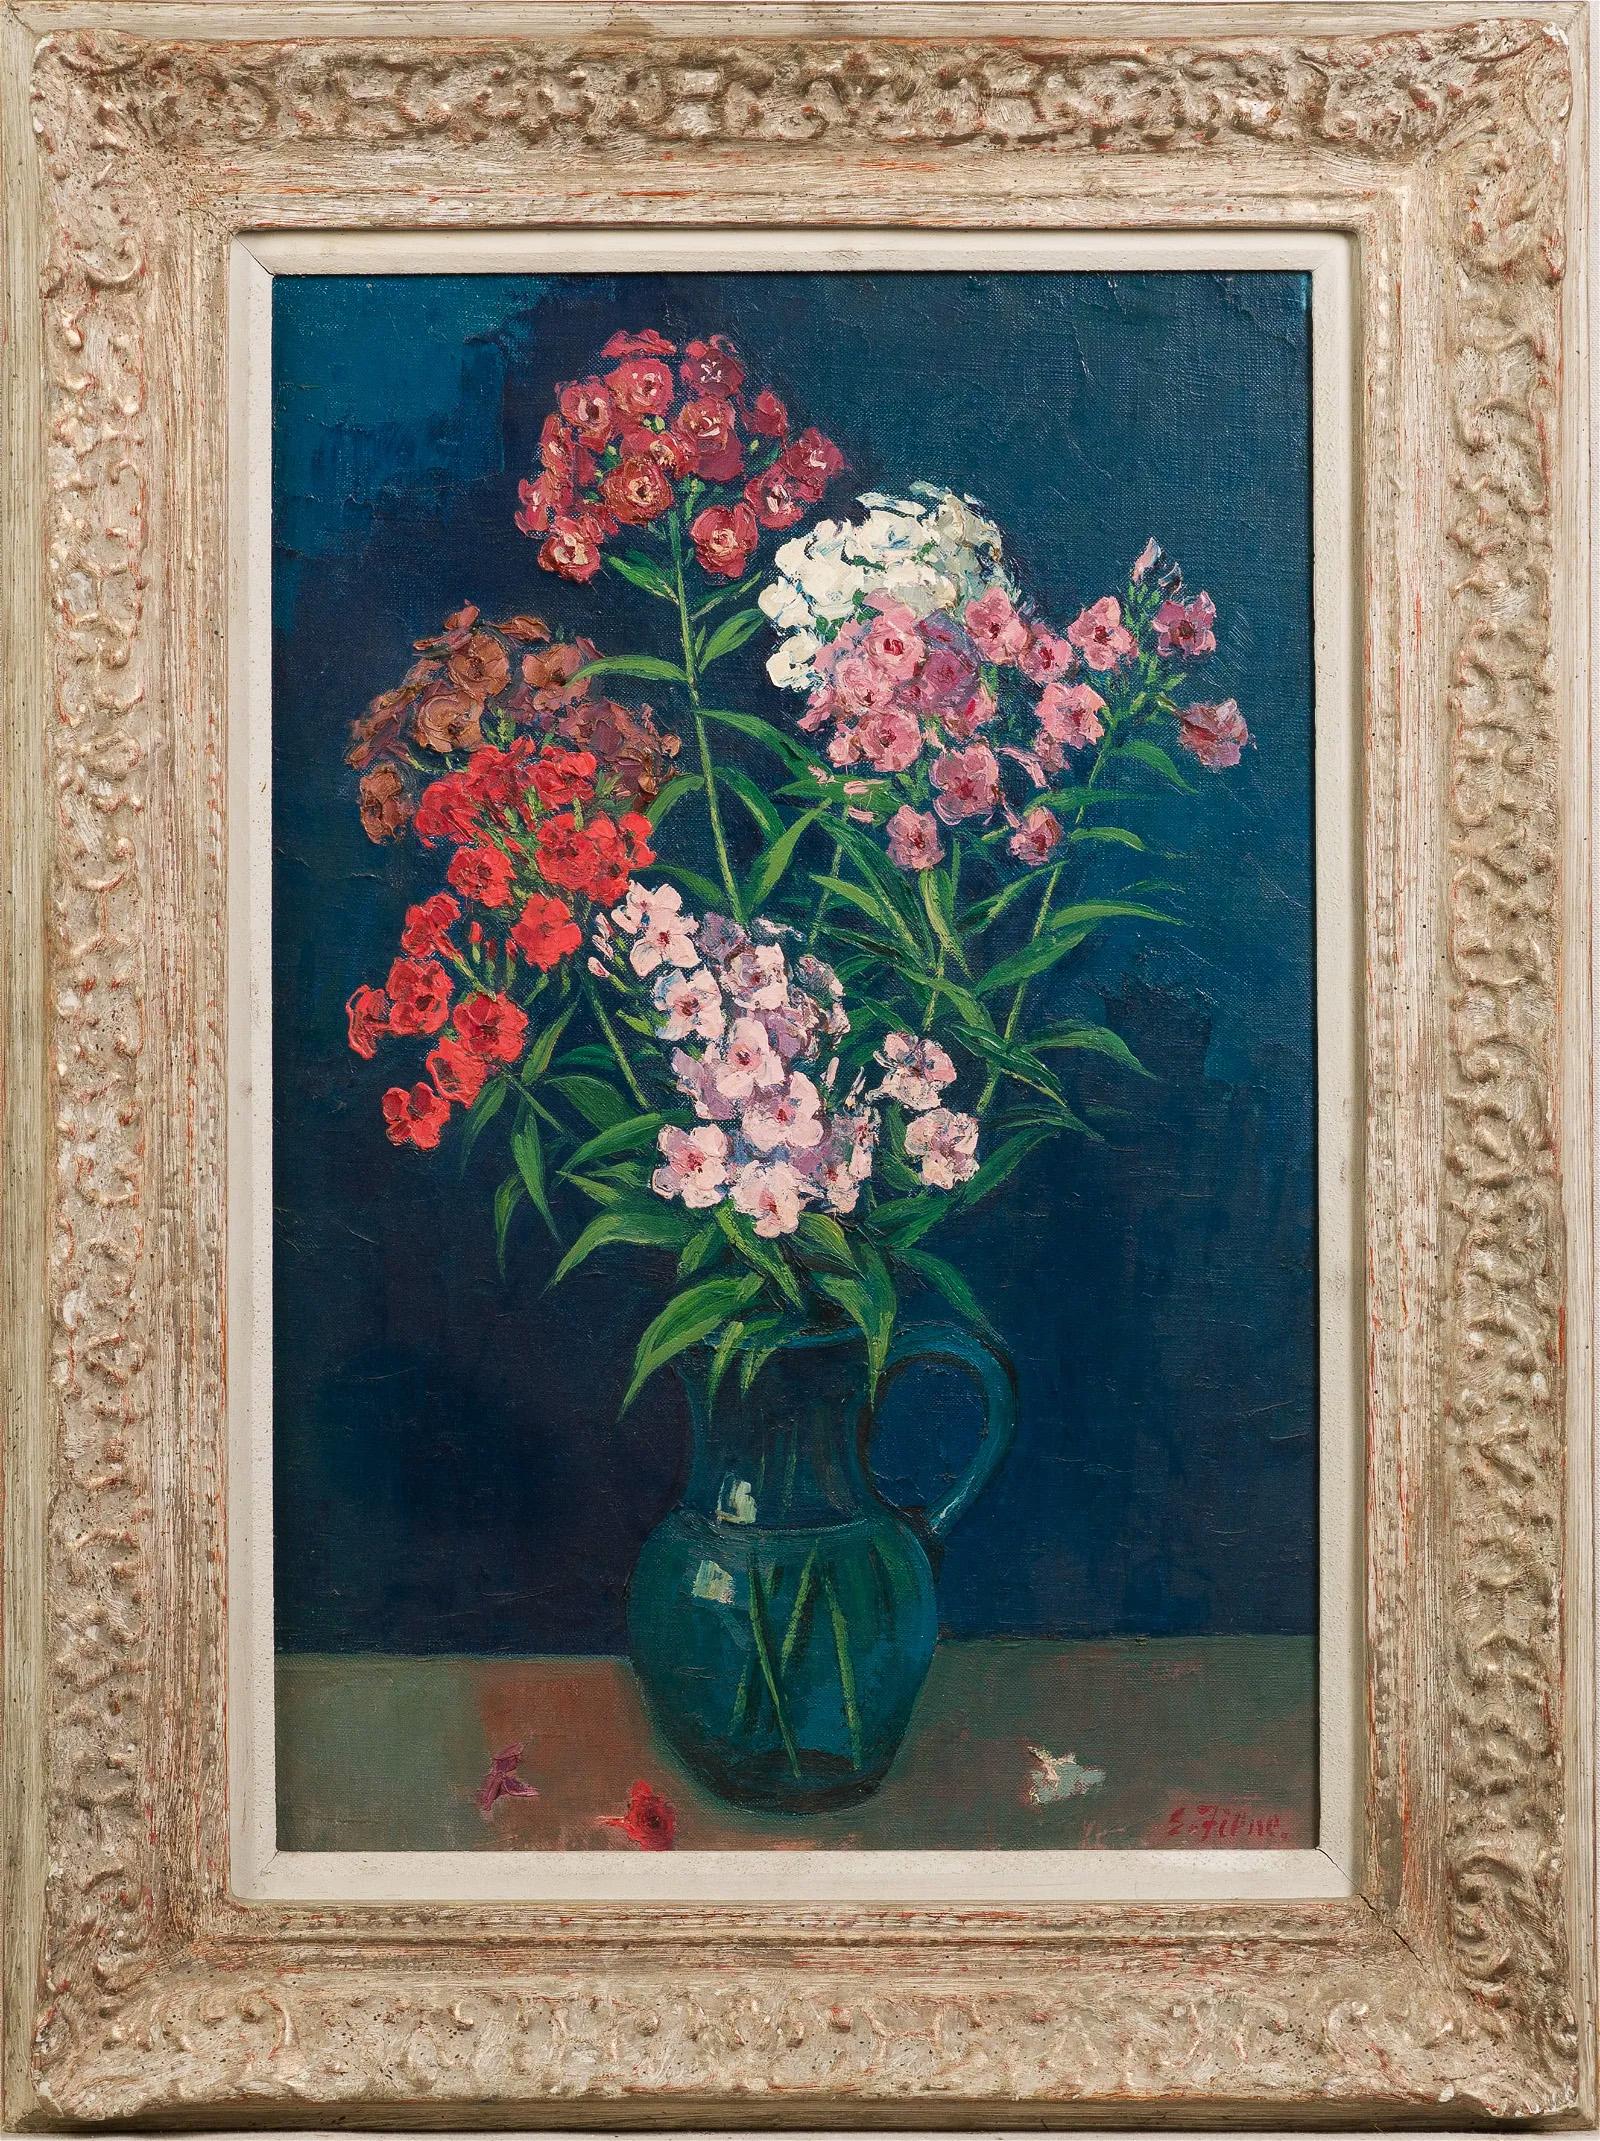 Ernest Fiene Abstract Painting - Phlox Flower Still Life Oil Painting Antique Exhibited Large Framed Oil Painting